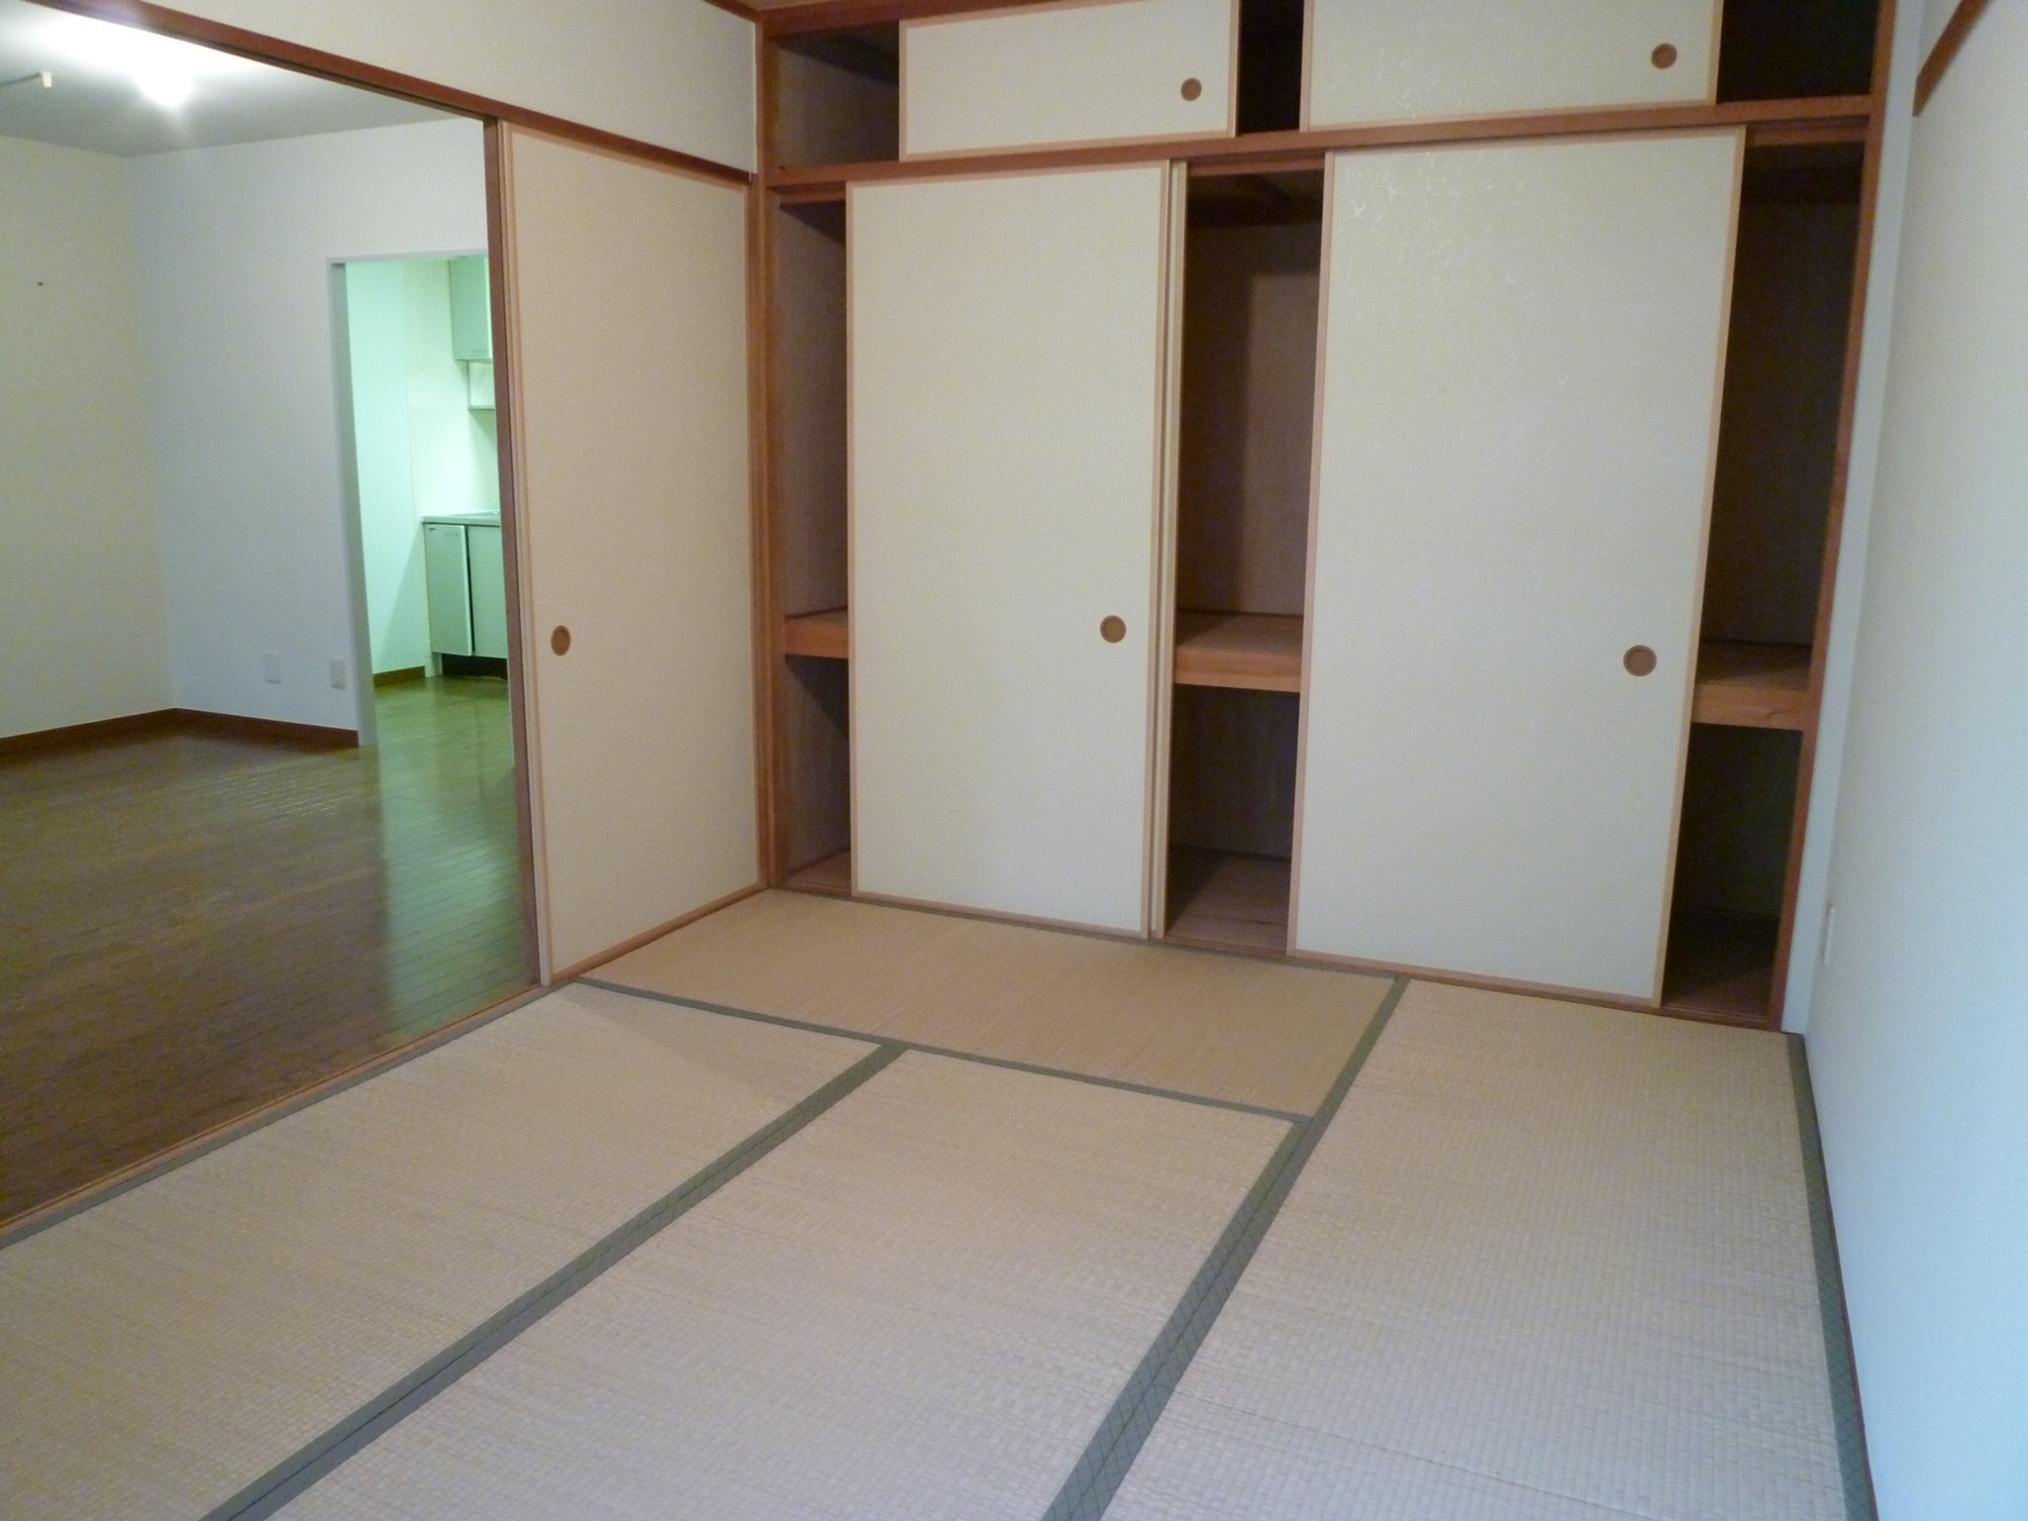 Living and room. 6-mat-sized Japanese-style room and closet